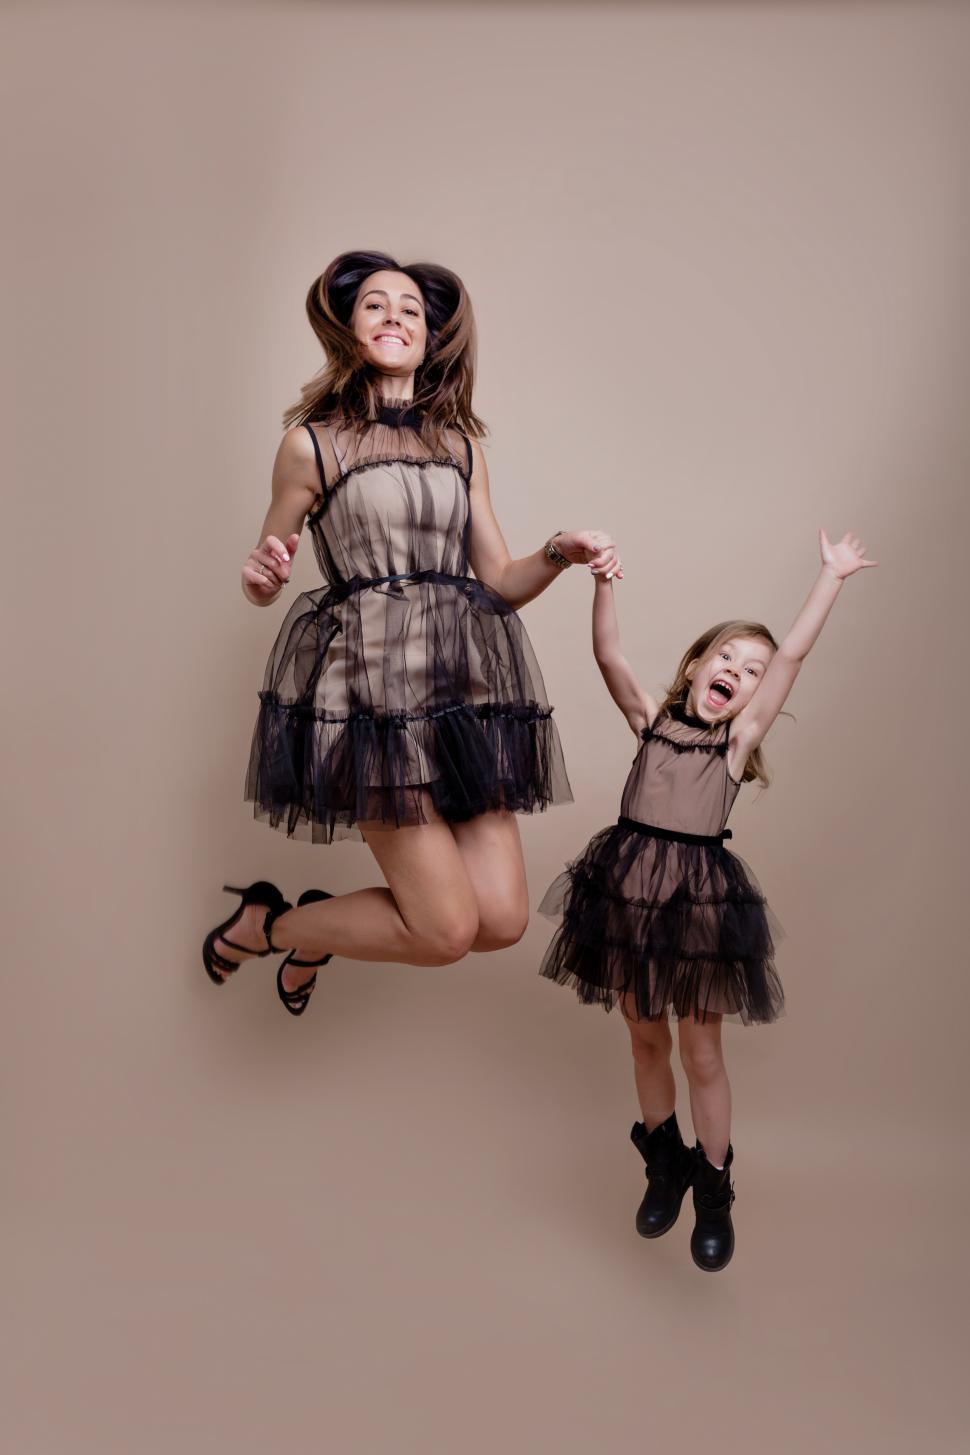 Download Free Stock Photo of Family shot of young mother with daughter jumping in air 